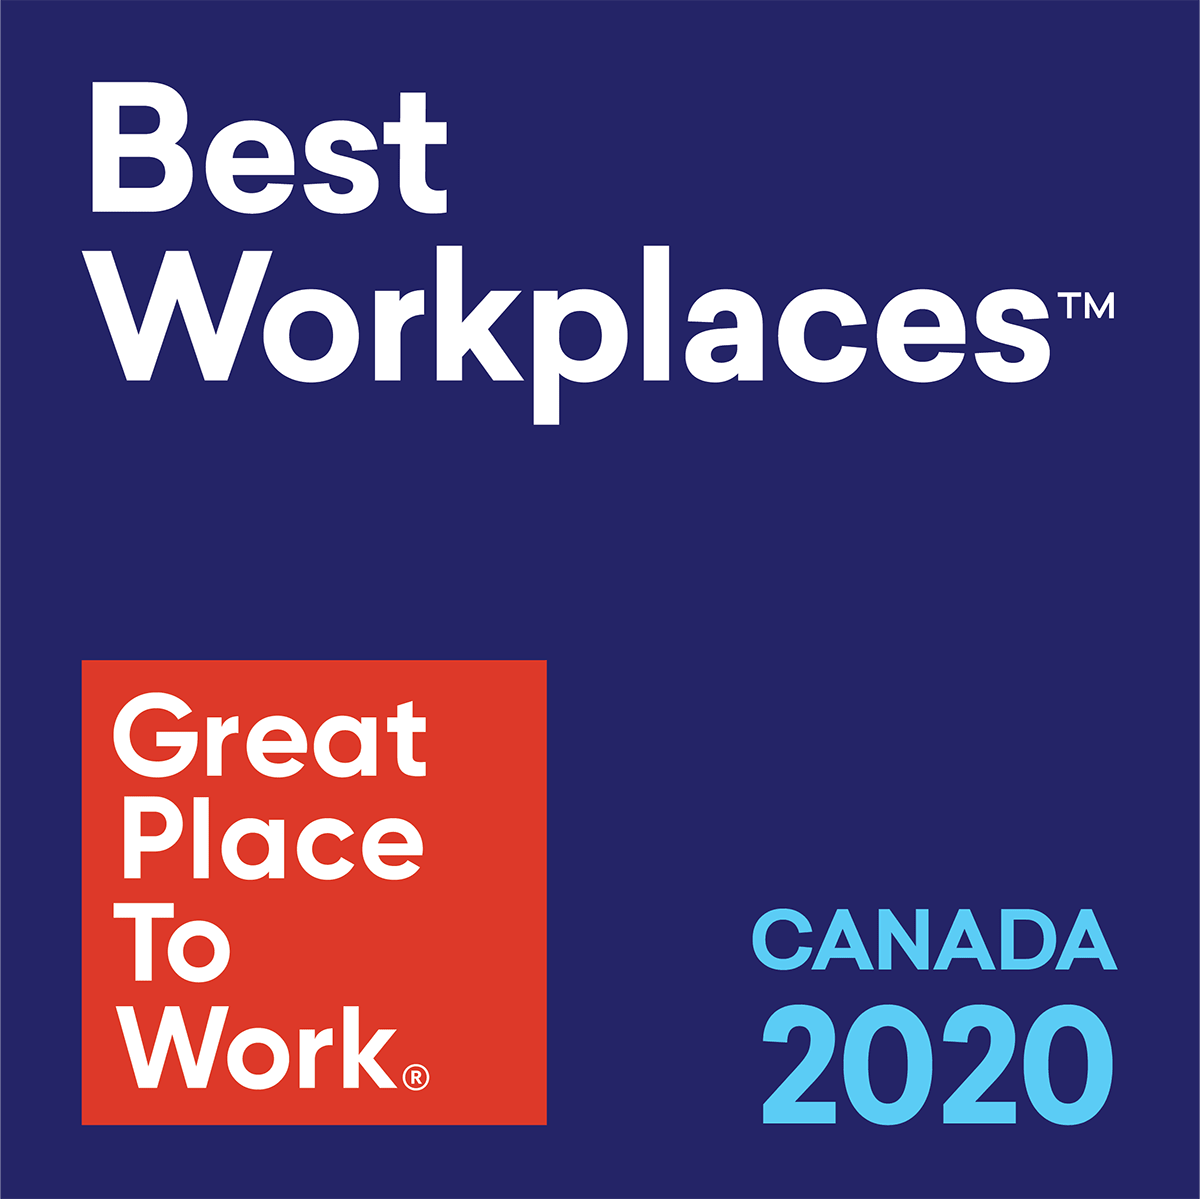 Great Place To Work 2020: 100-999 Employees